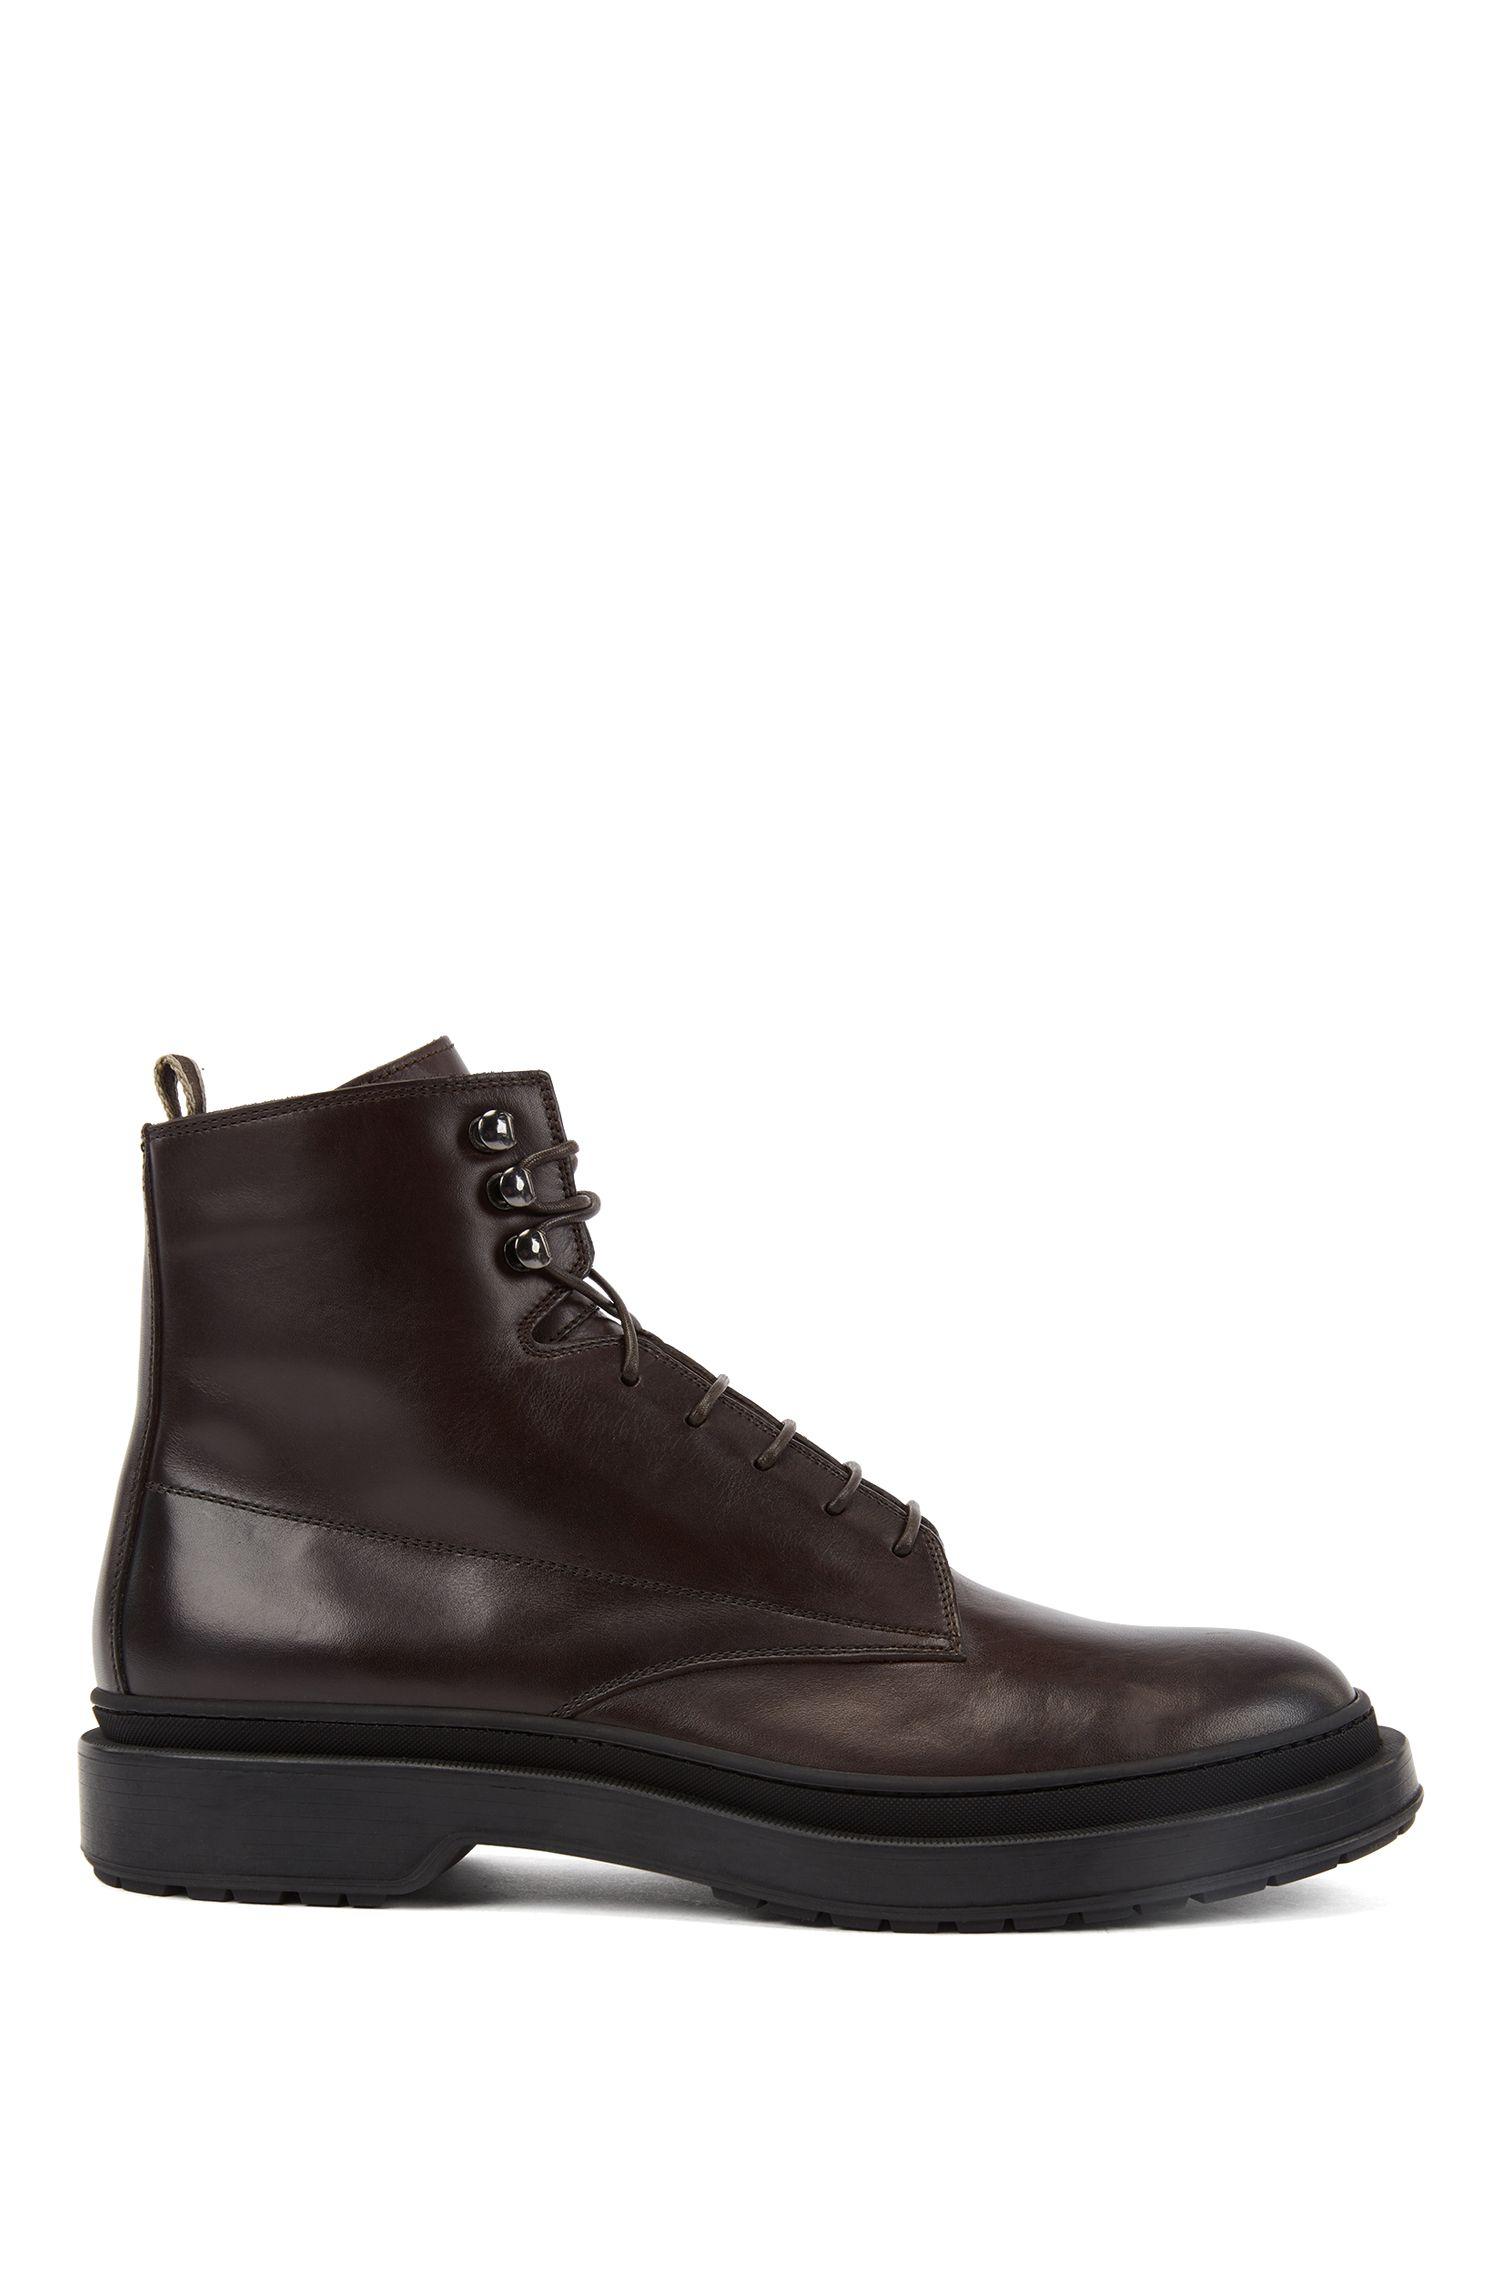 BOSS by Hugo Boss Lace Up Boots In Leather With Shearling Lining in ...